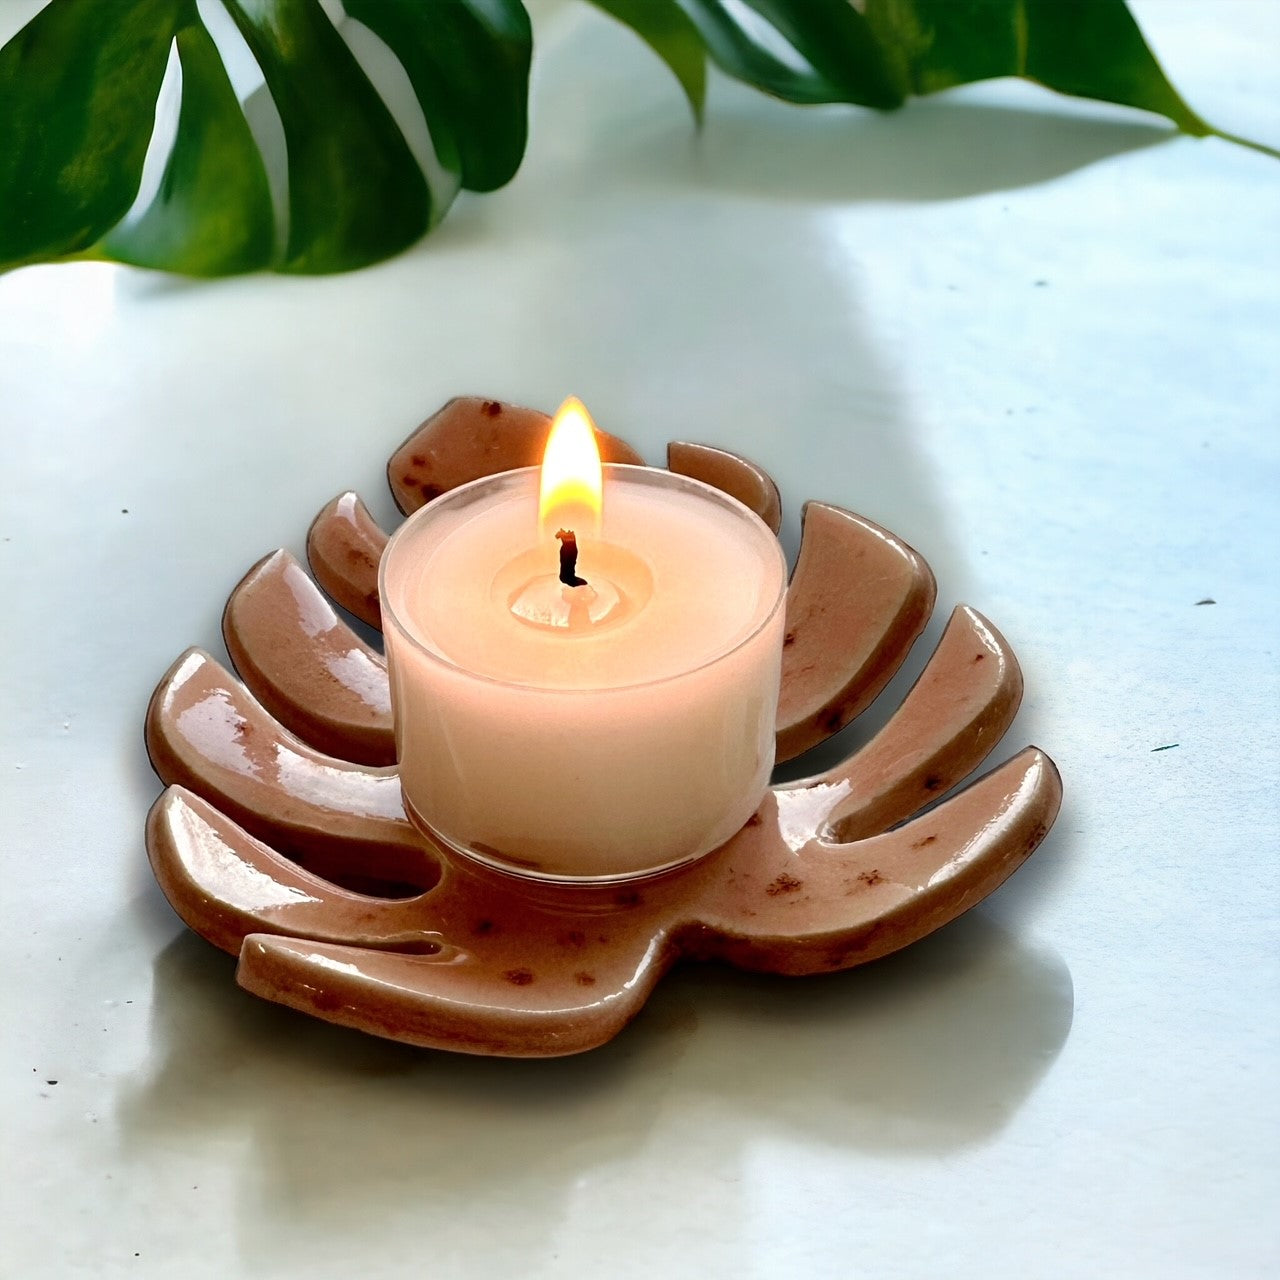 Pink Monstera leaf tealight holder with a lit candle life style image